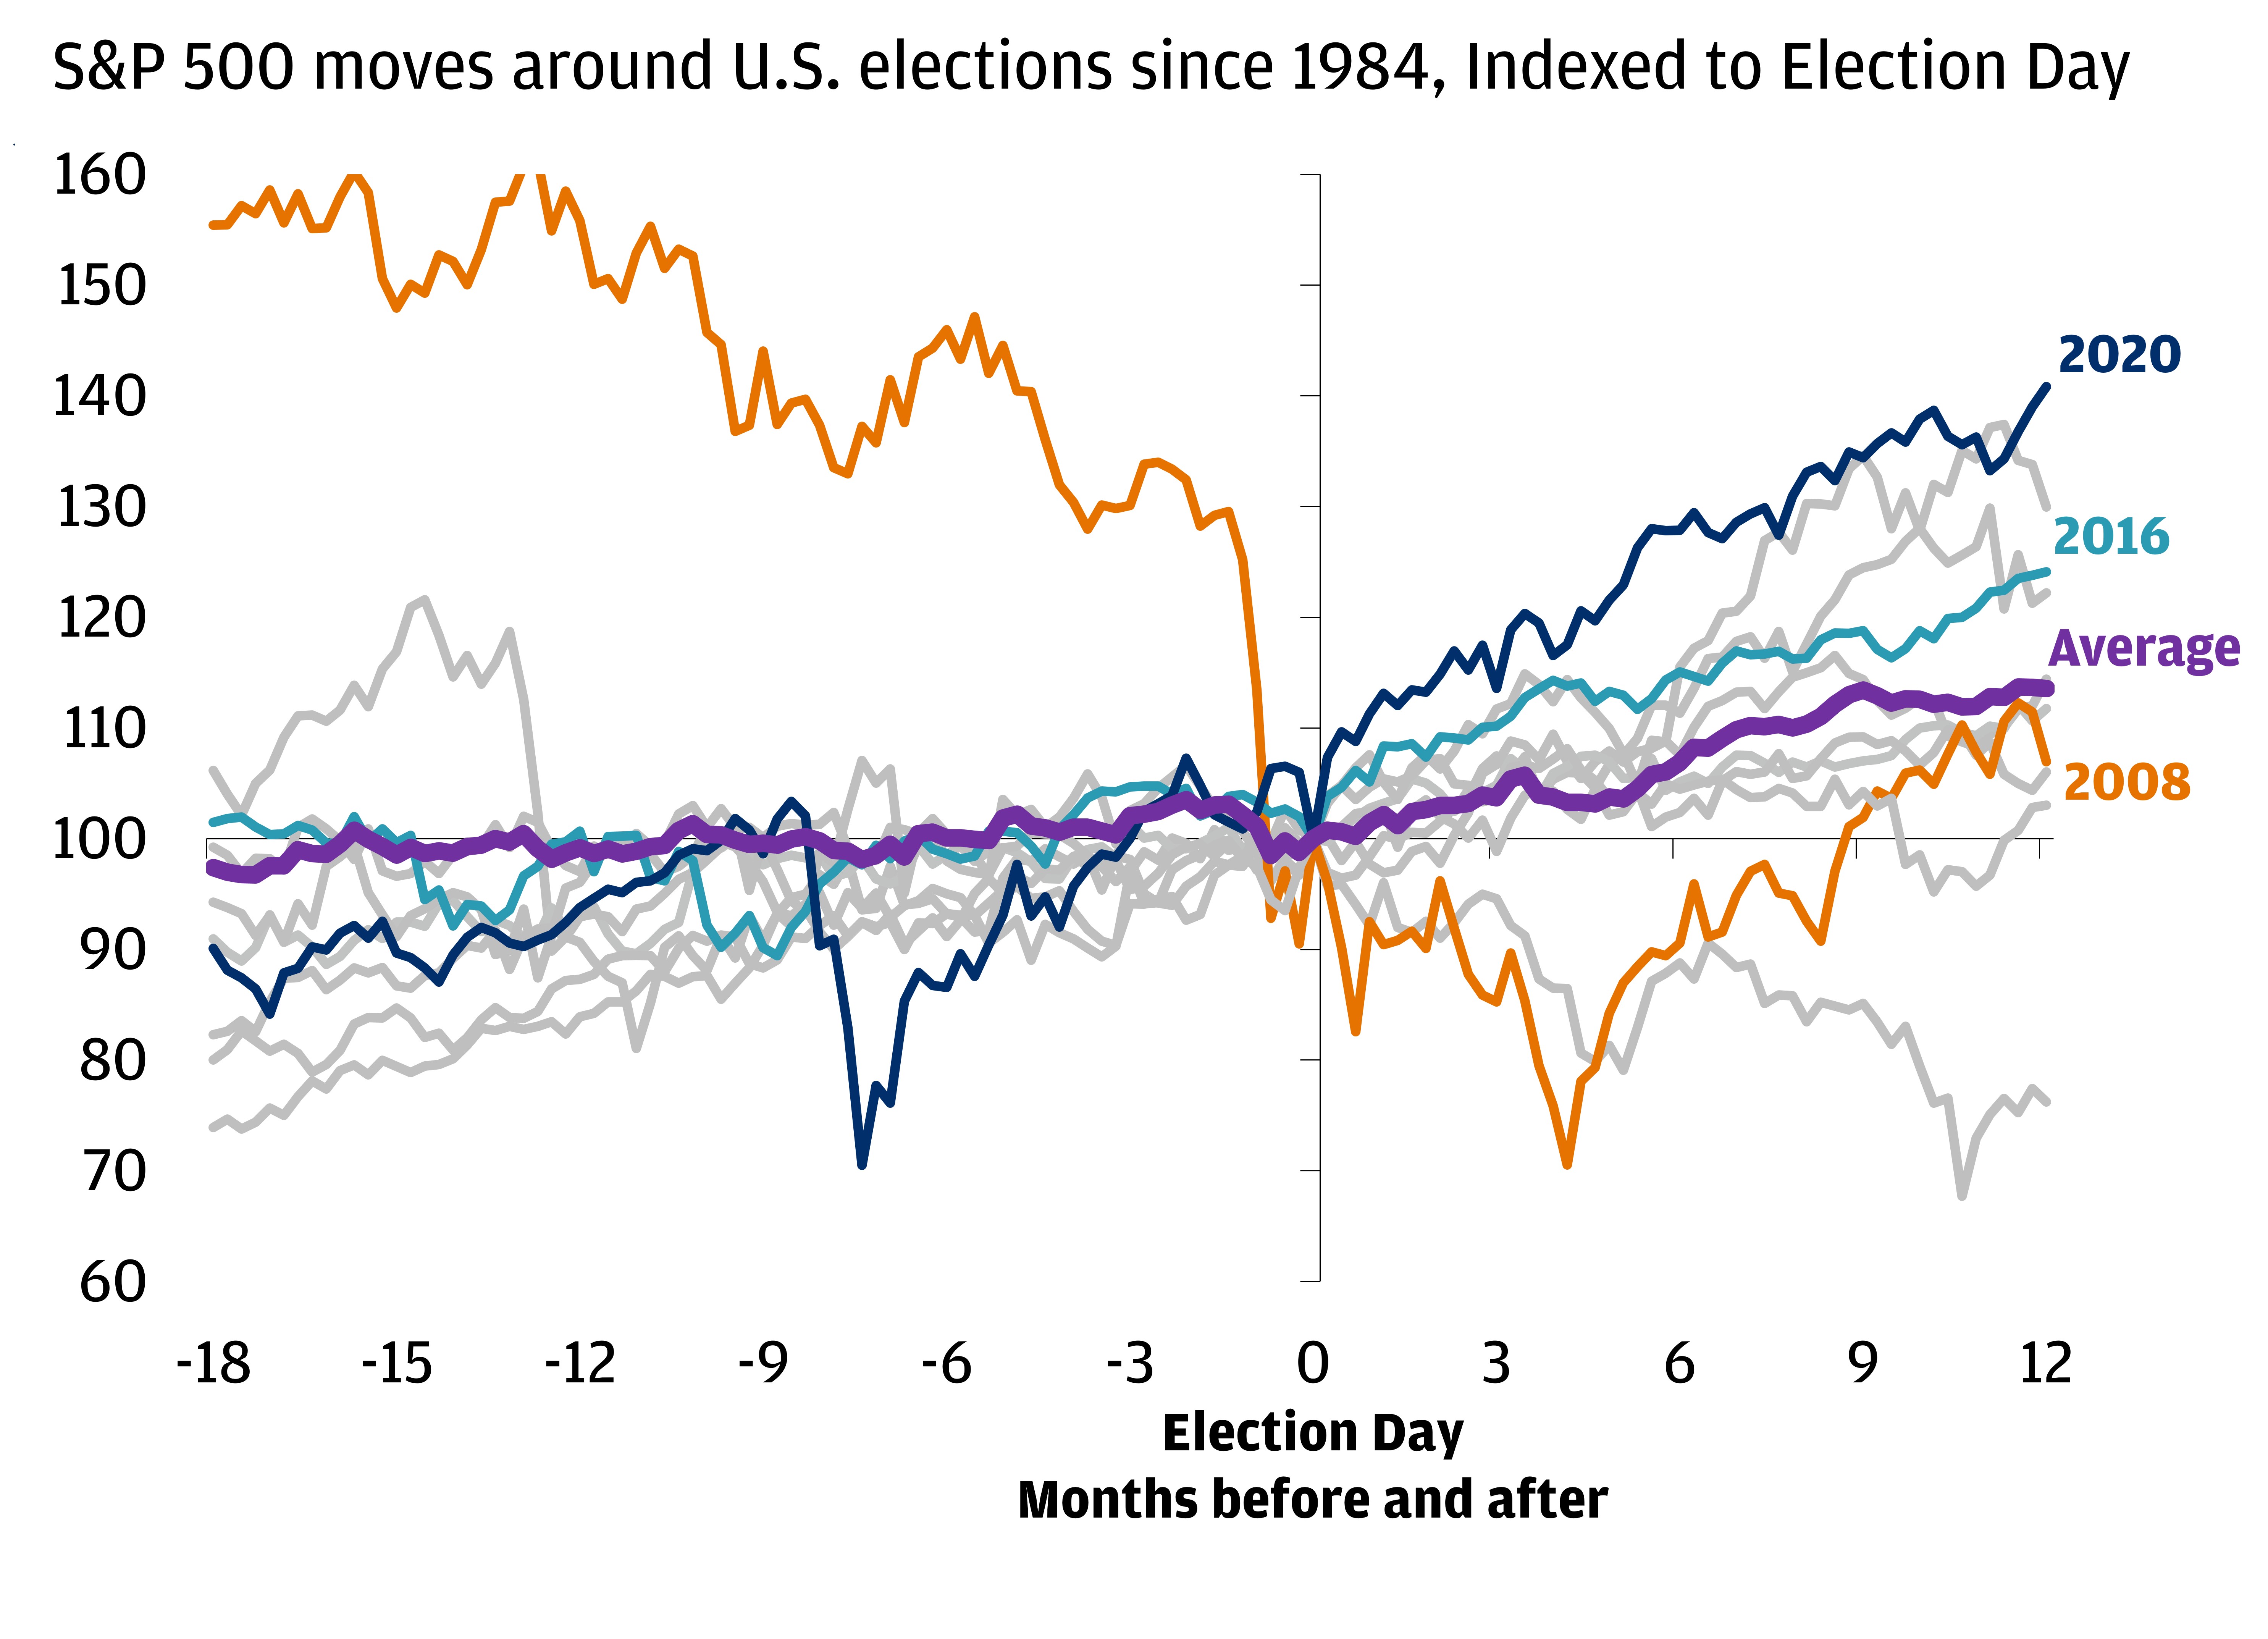 This chart shows the S&P 500 performance around U.S. elections since 1980, indexed to Election Day.